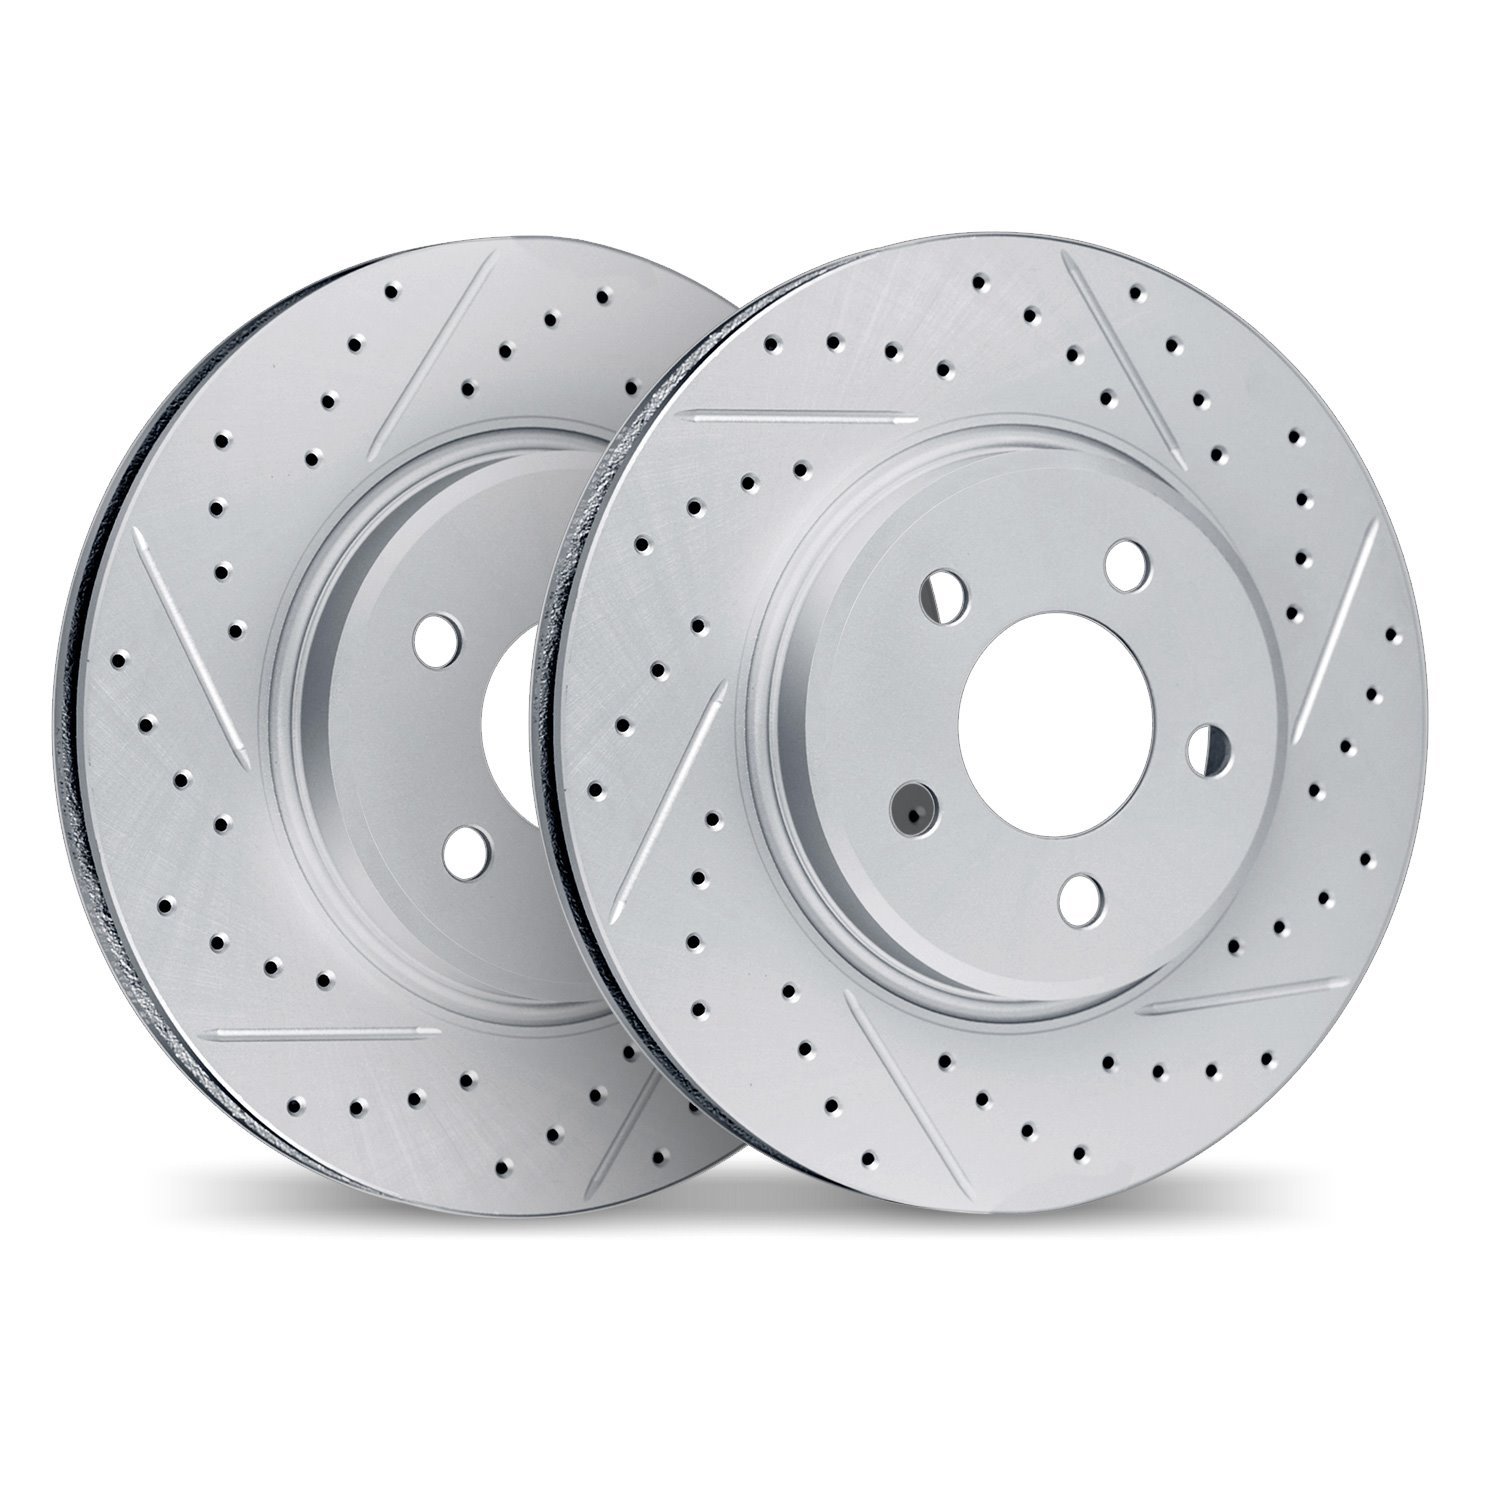 2002-46109 Geoperformance Drilled/Slotted Brake Rotors, Fits Select GM, Position: Rear